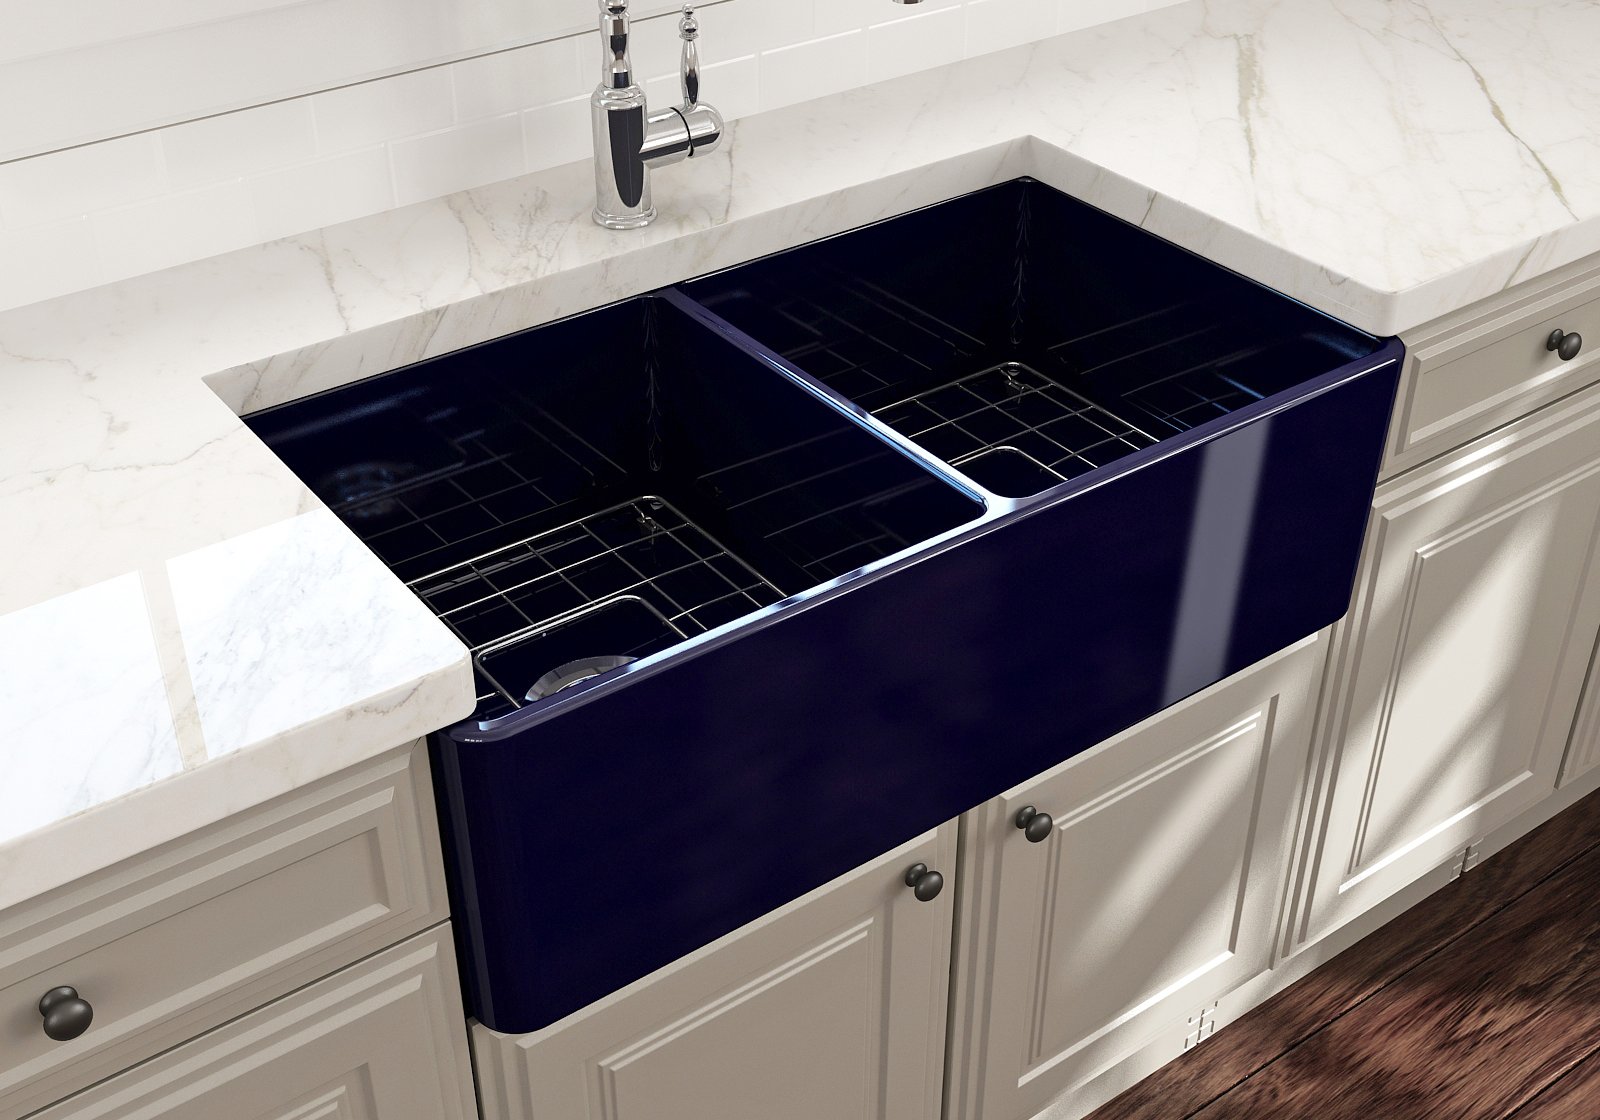 Bocchi Classico Farmhouse Apron Front Fireclay 33" Double Bowl Kitchen Sink. Available in 9 Colors!